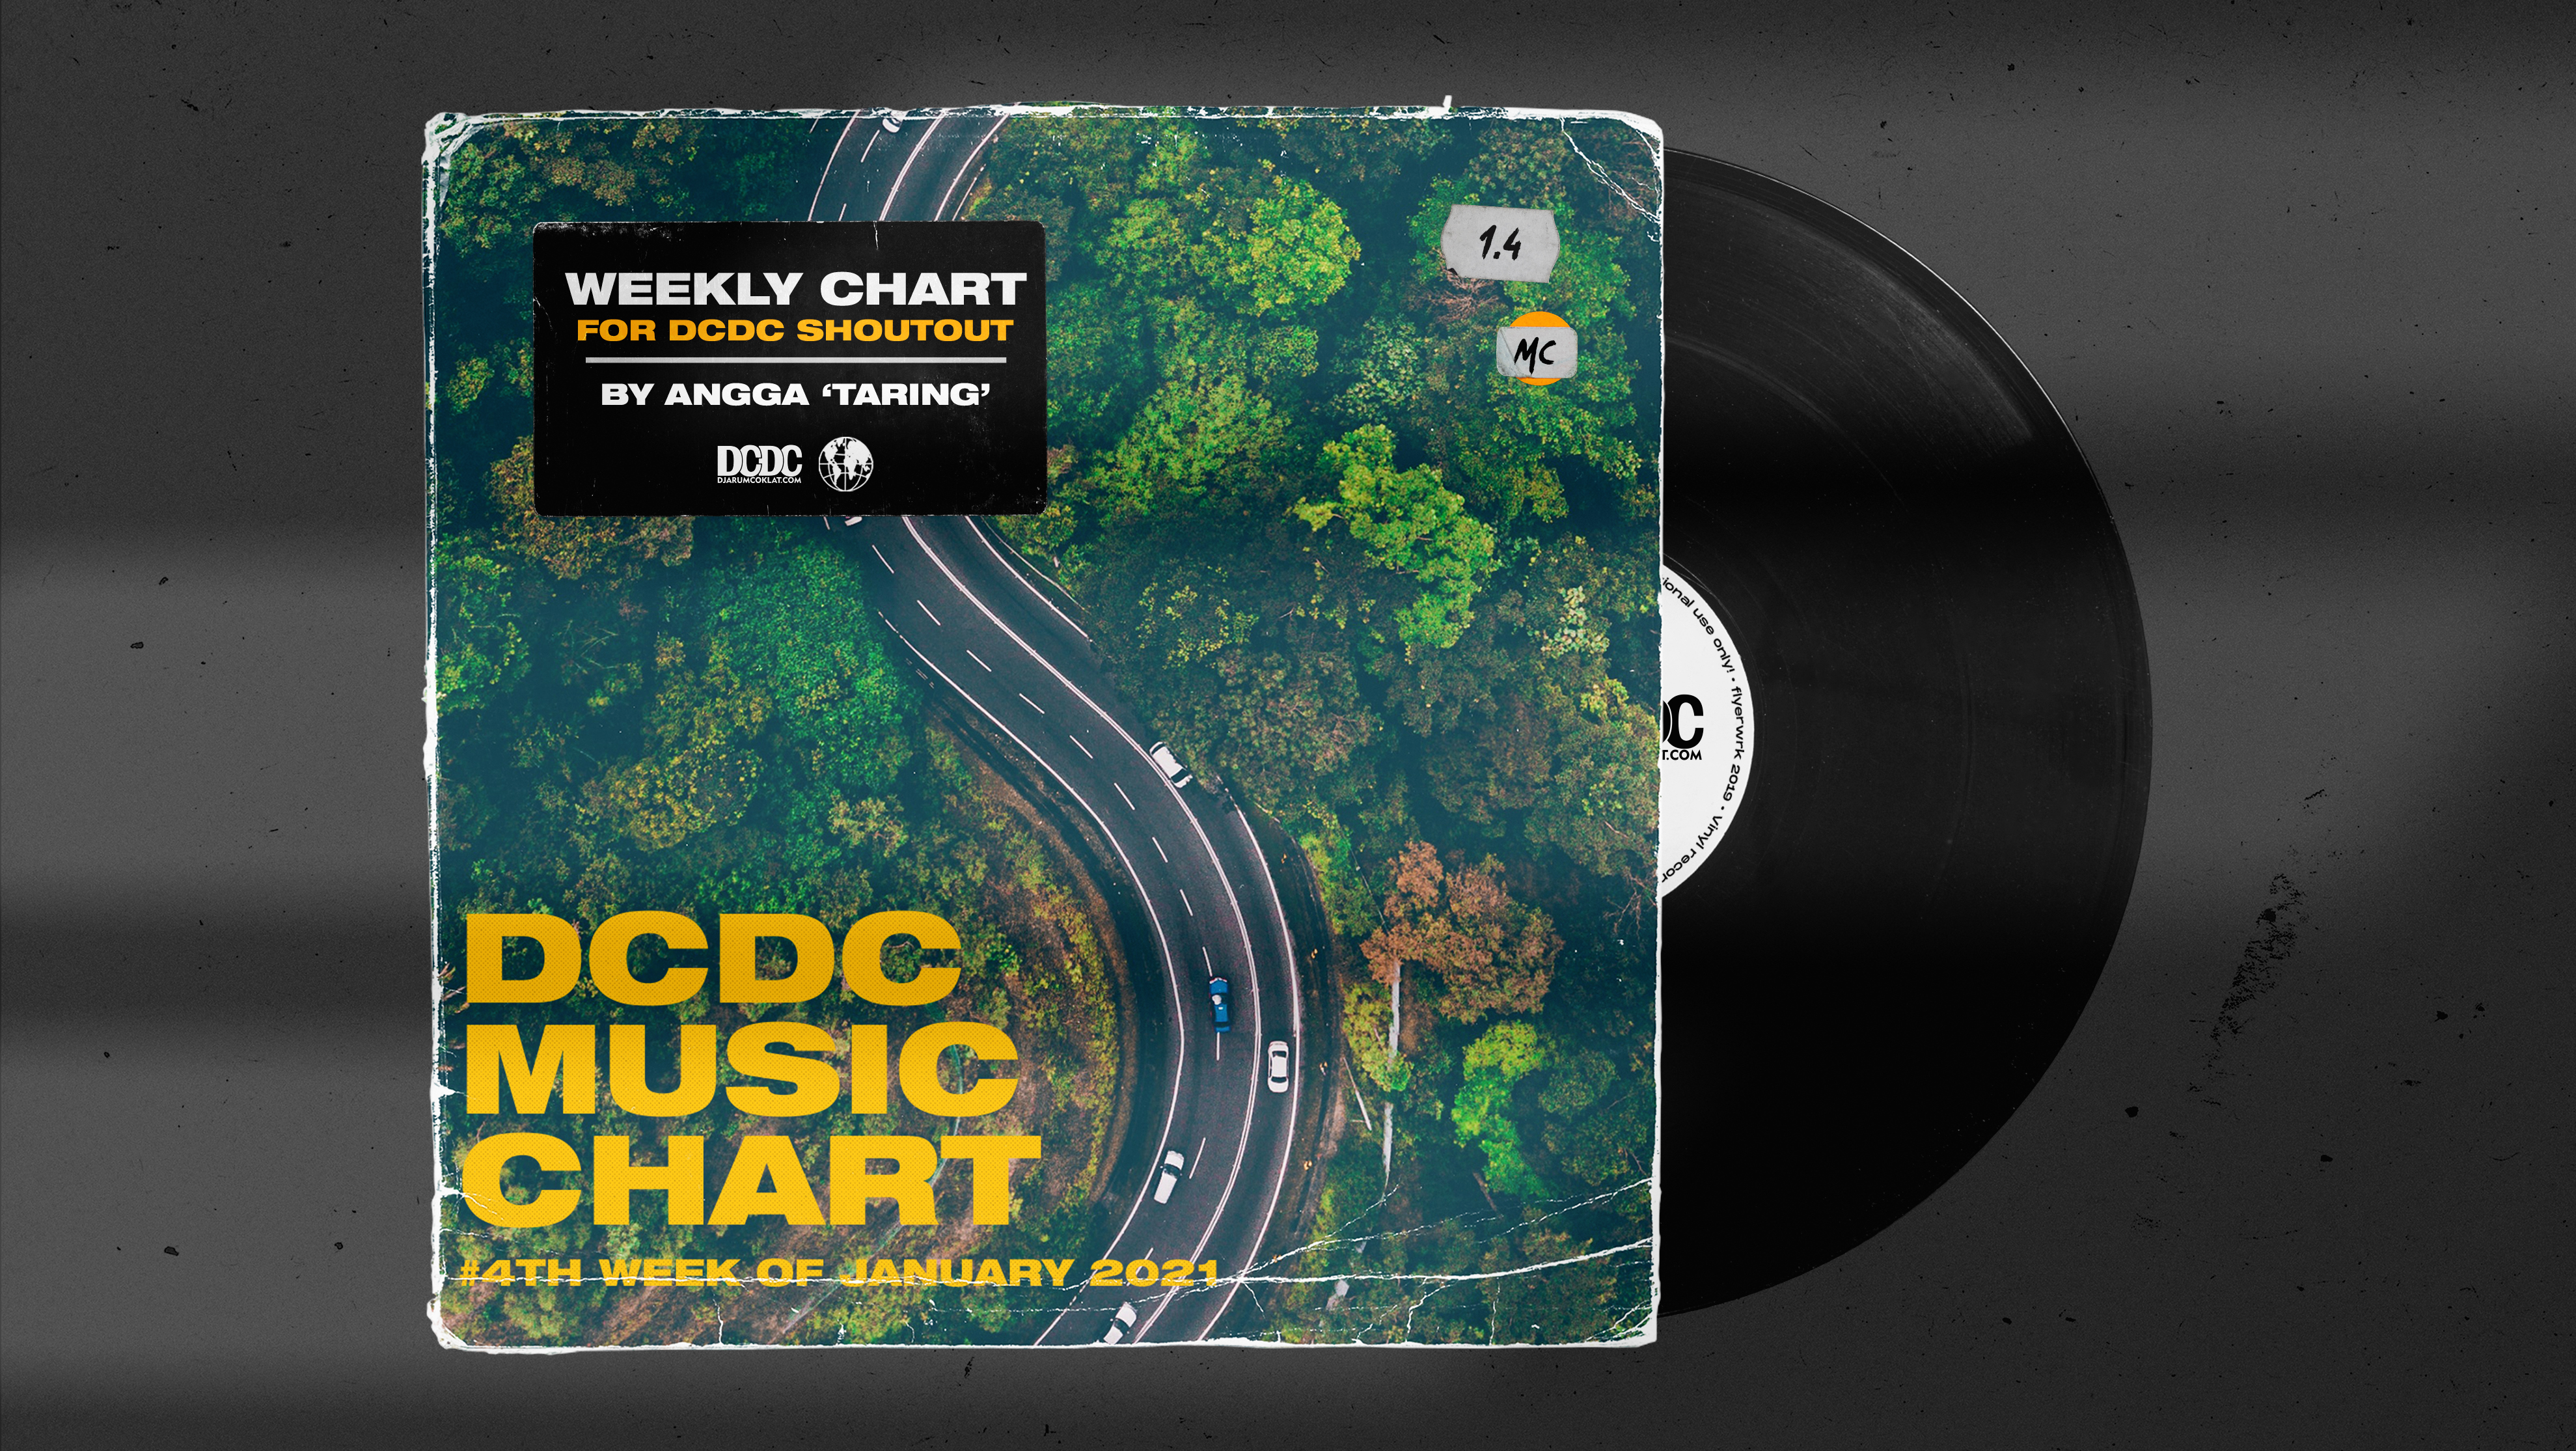 DCDC Music Chart - #4th Week of January 2021